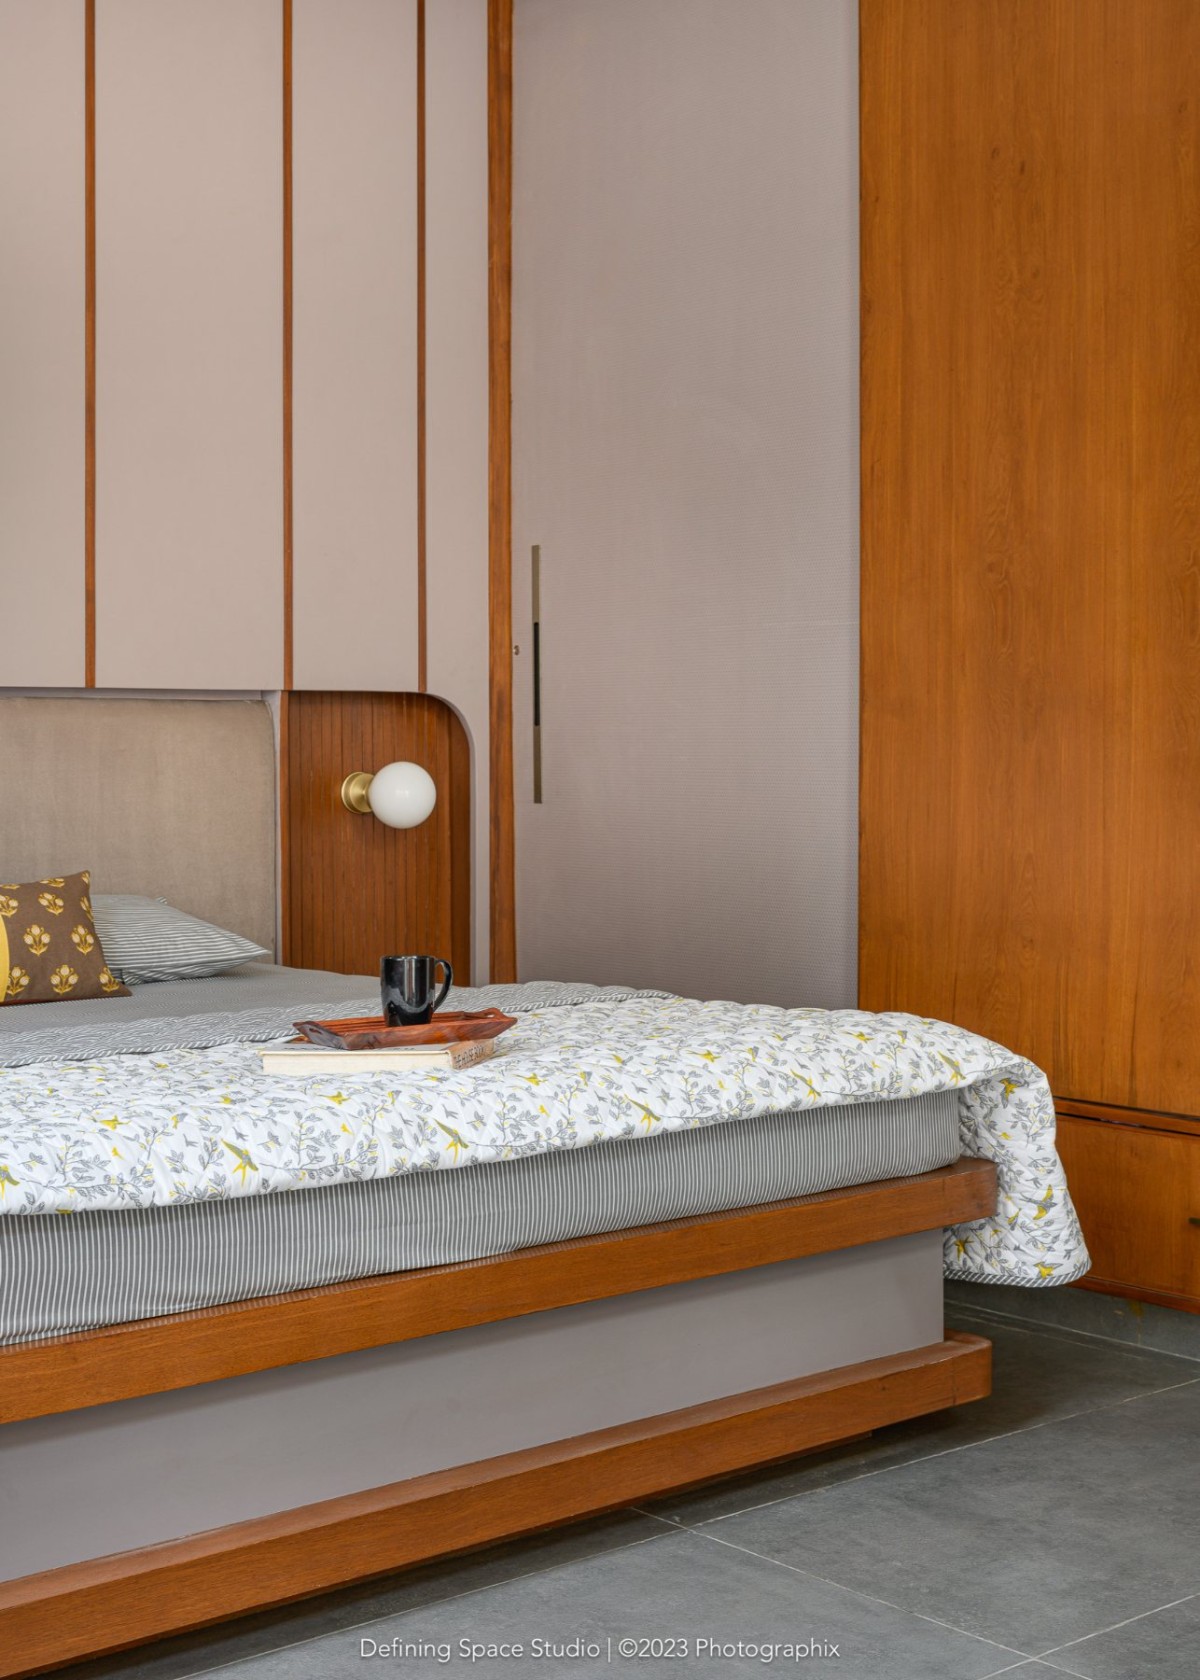 Bedroom of Anugraha by Defining Space Studio